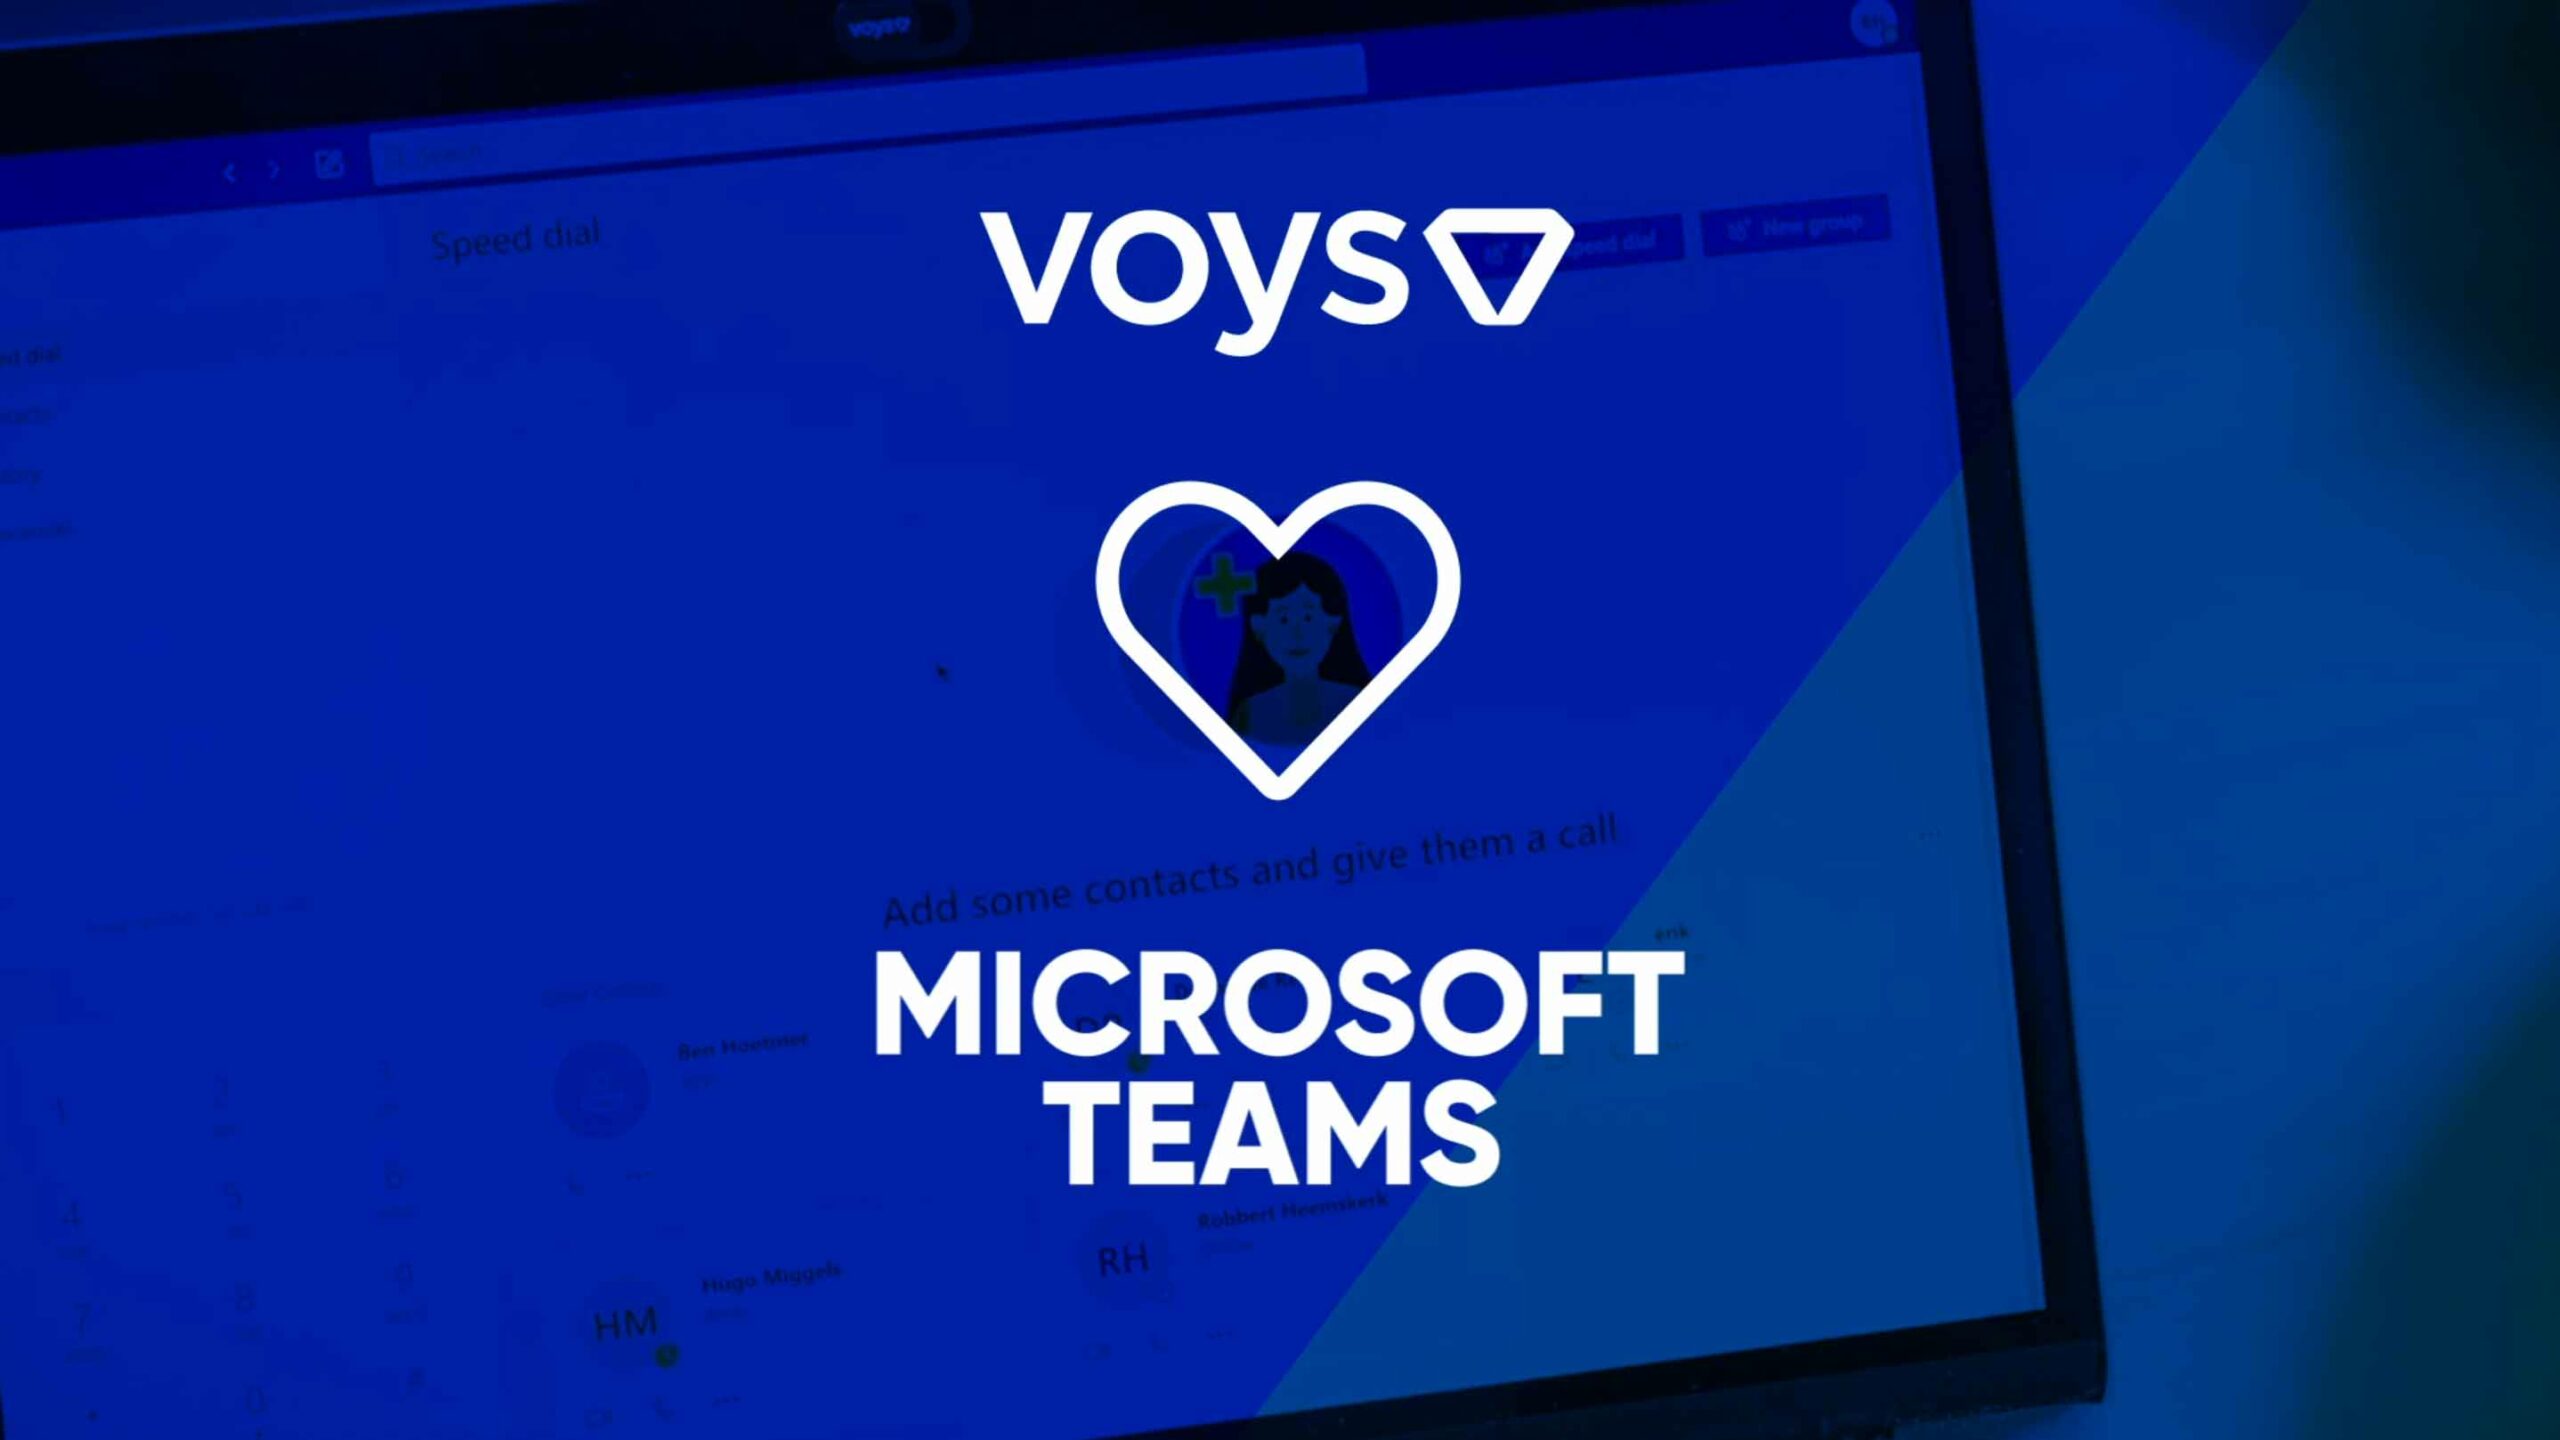 Microsoft 365 business voice - Phone calls using the Teams workspace